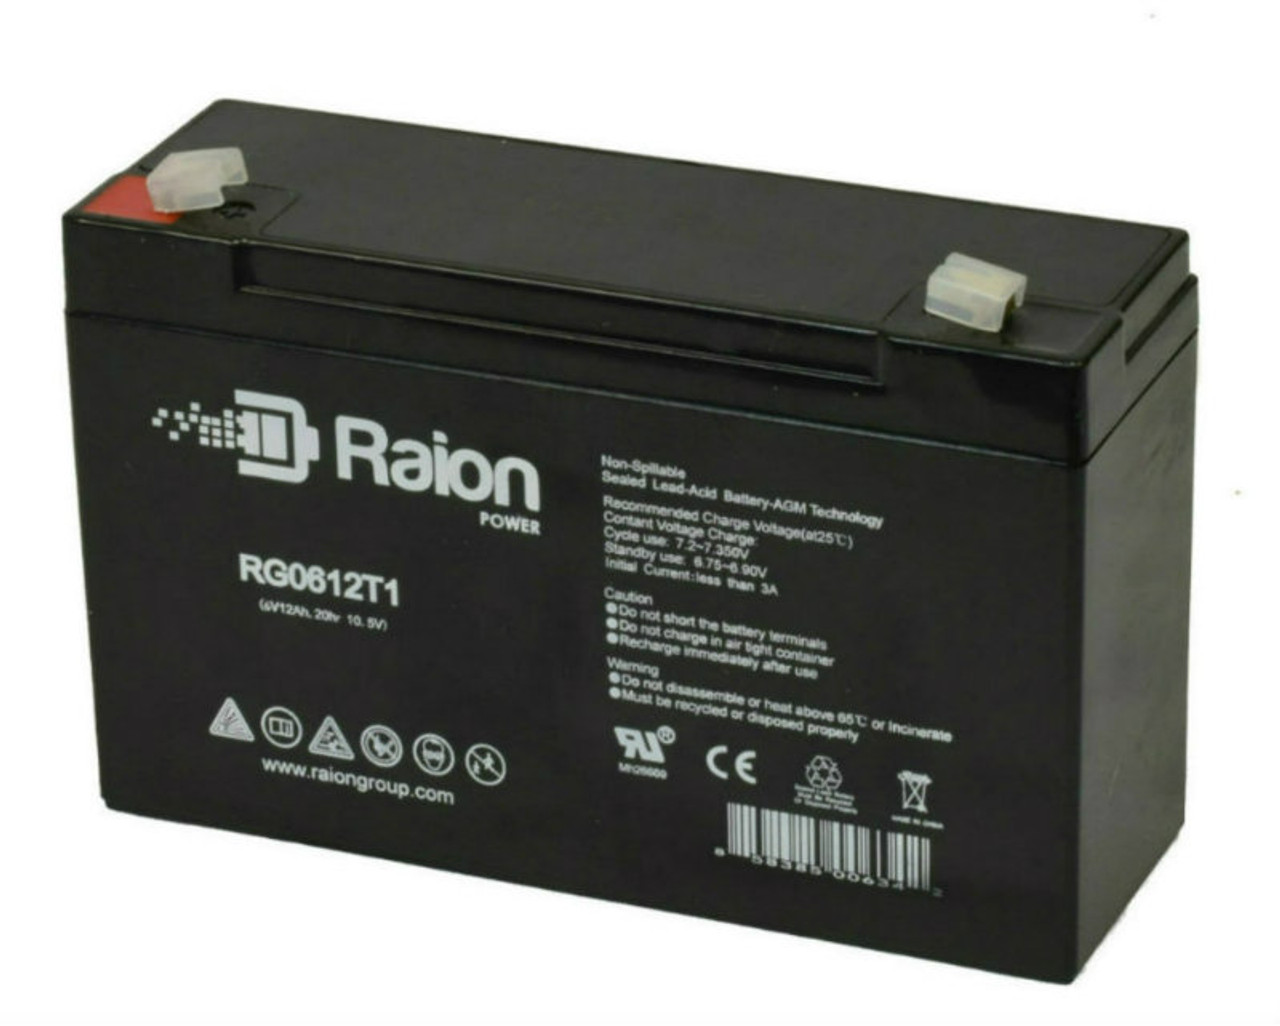 Raion Power RG06120T1 Replacement 6V 12Ah Emergency Light Battery for Holophane M33